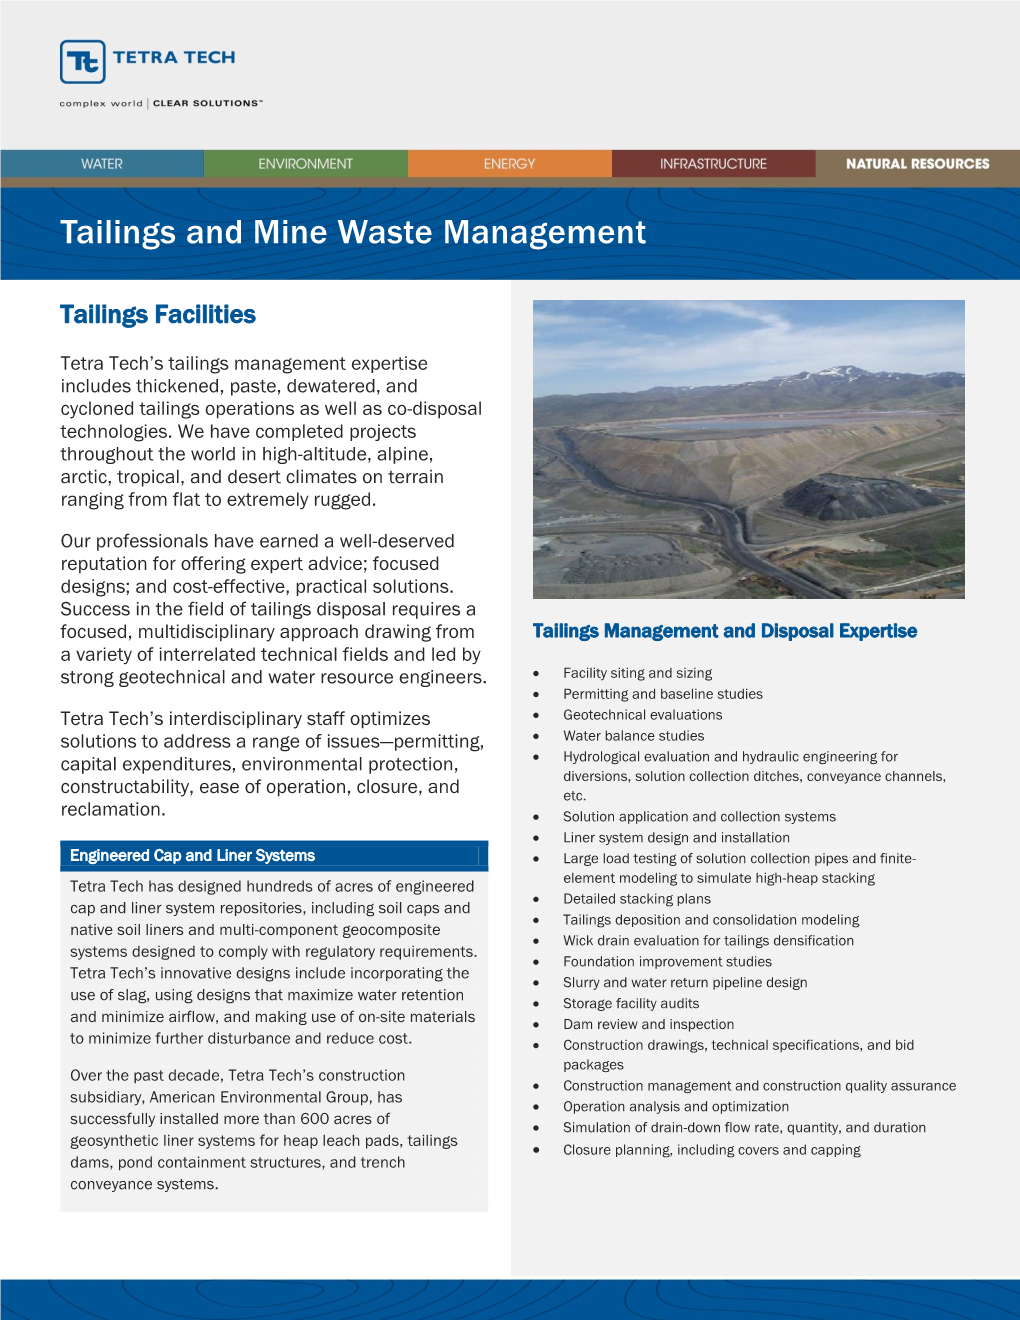 Tailings and Mine Waste Management DocsLib